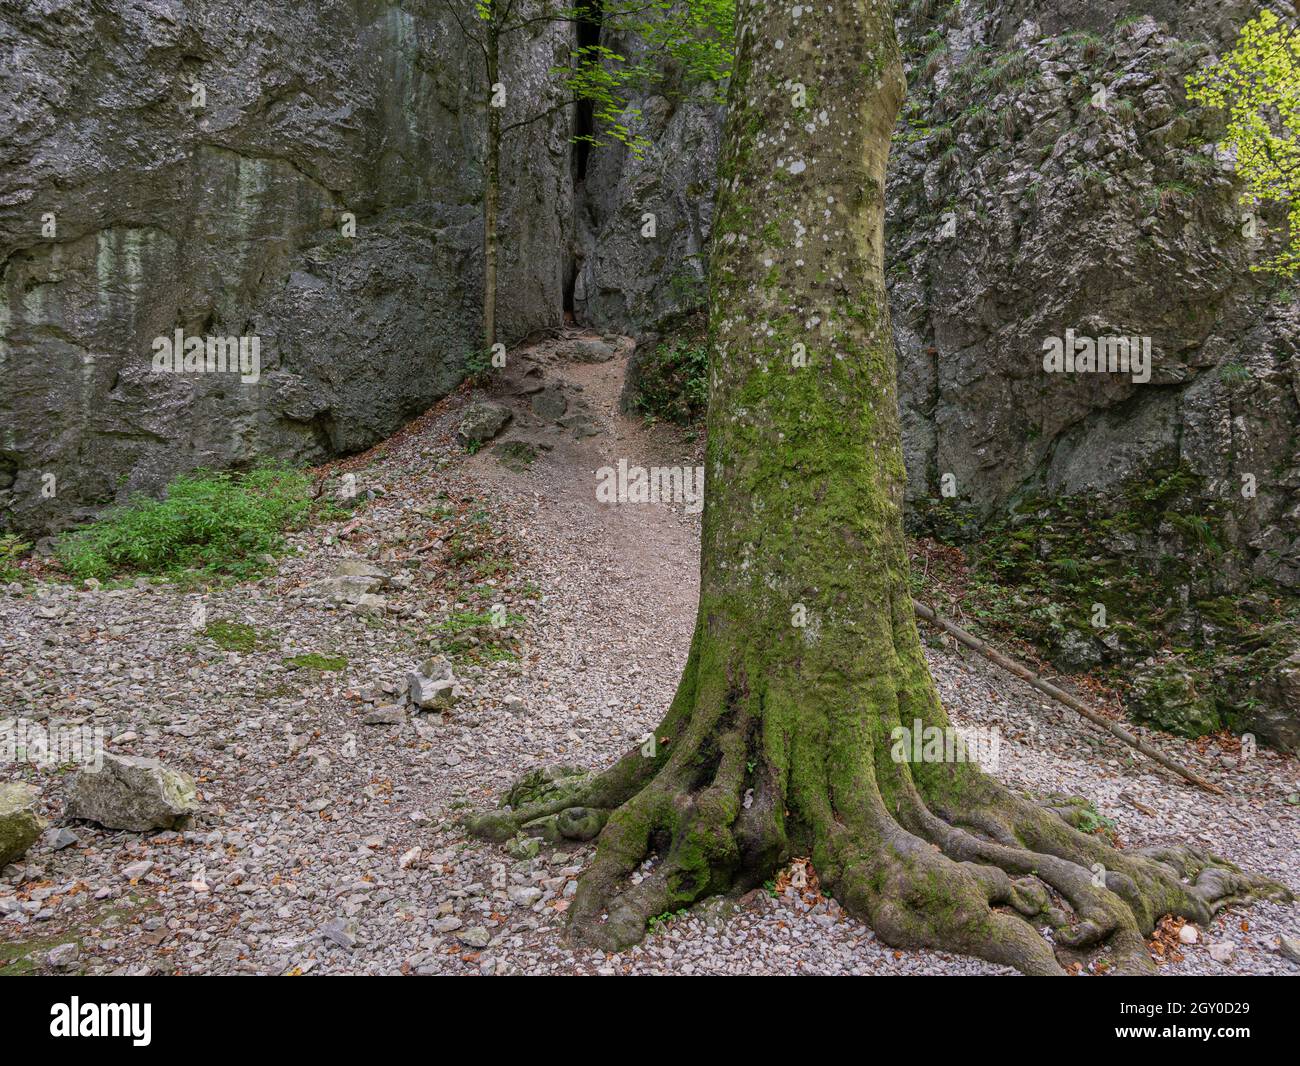 A solitary tree in front of a narrow rocky gorge Stock Photo